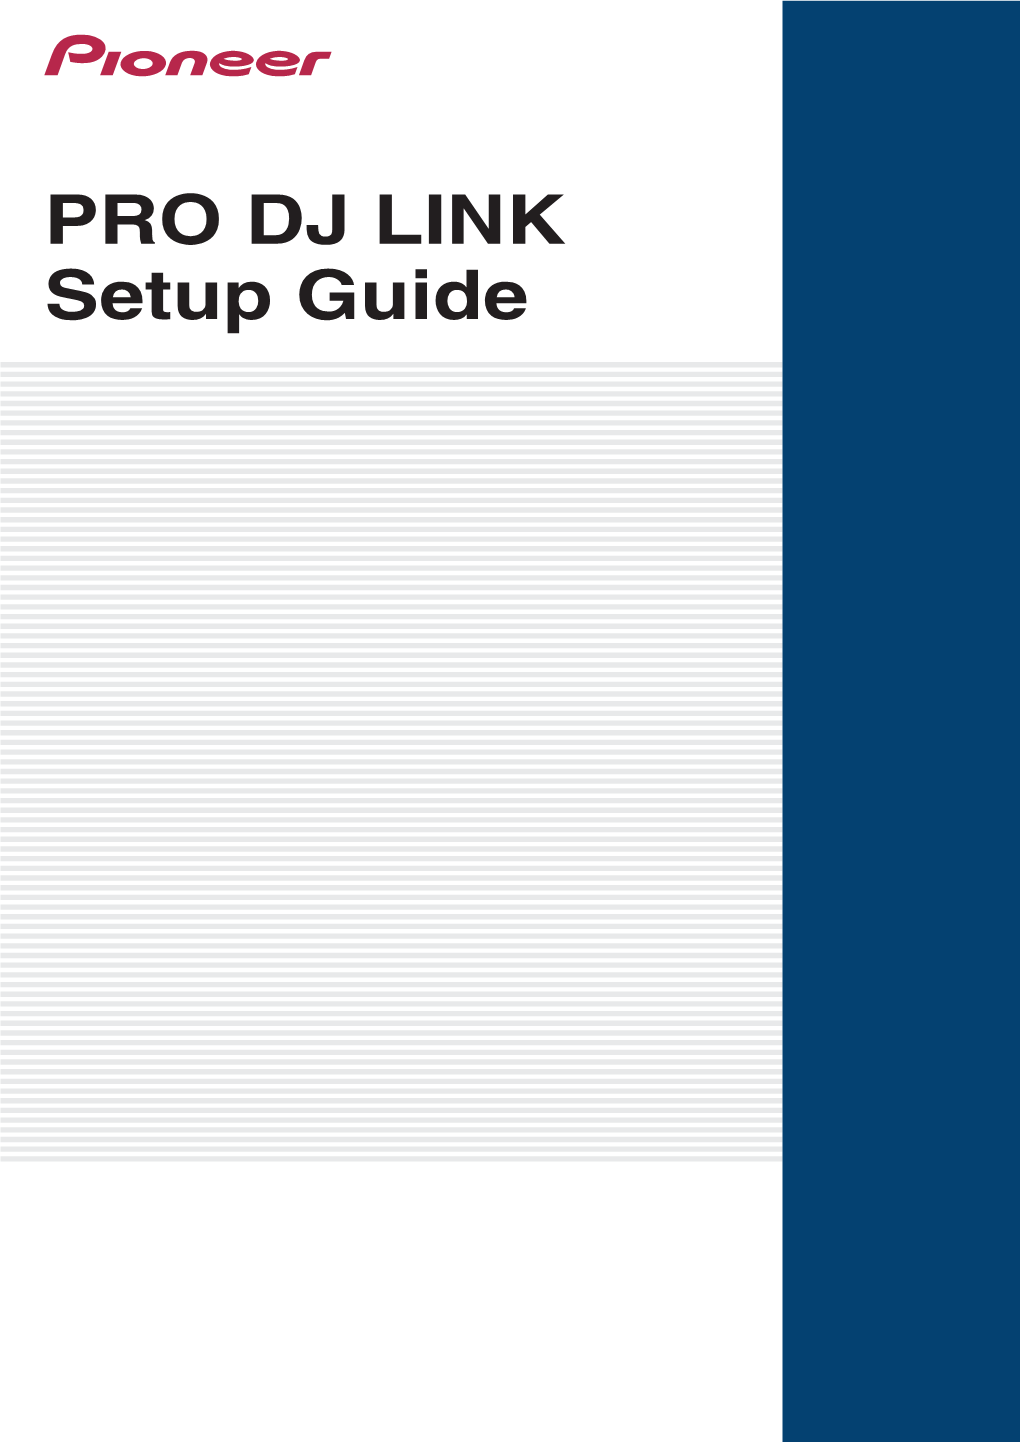 PRO DJ LINK Setup Guide Contents How to Read This Manual the Instructions in This Manual Use the Indications Below